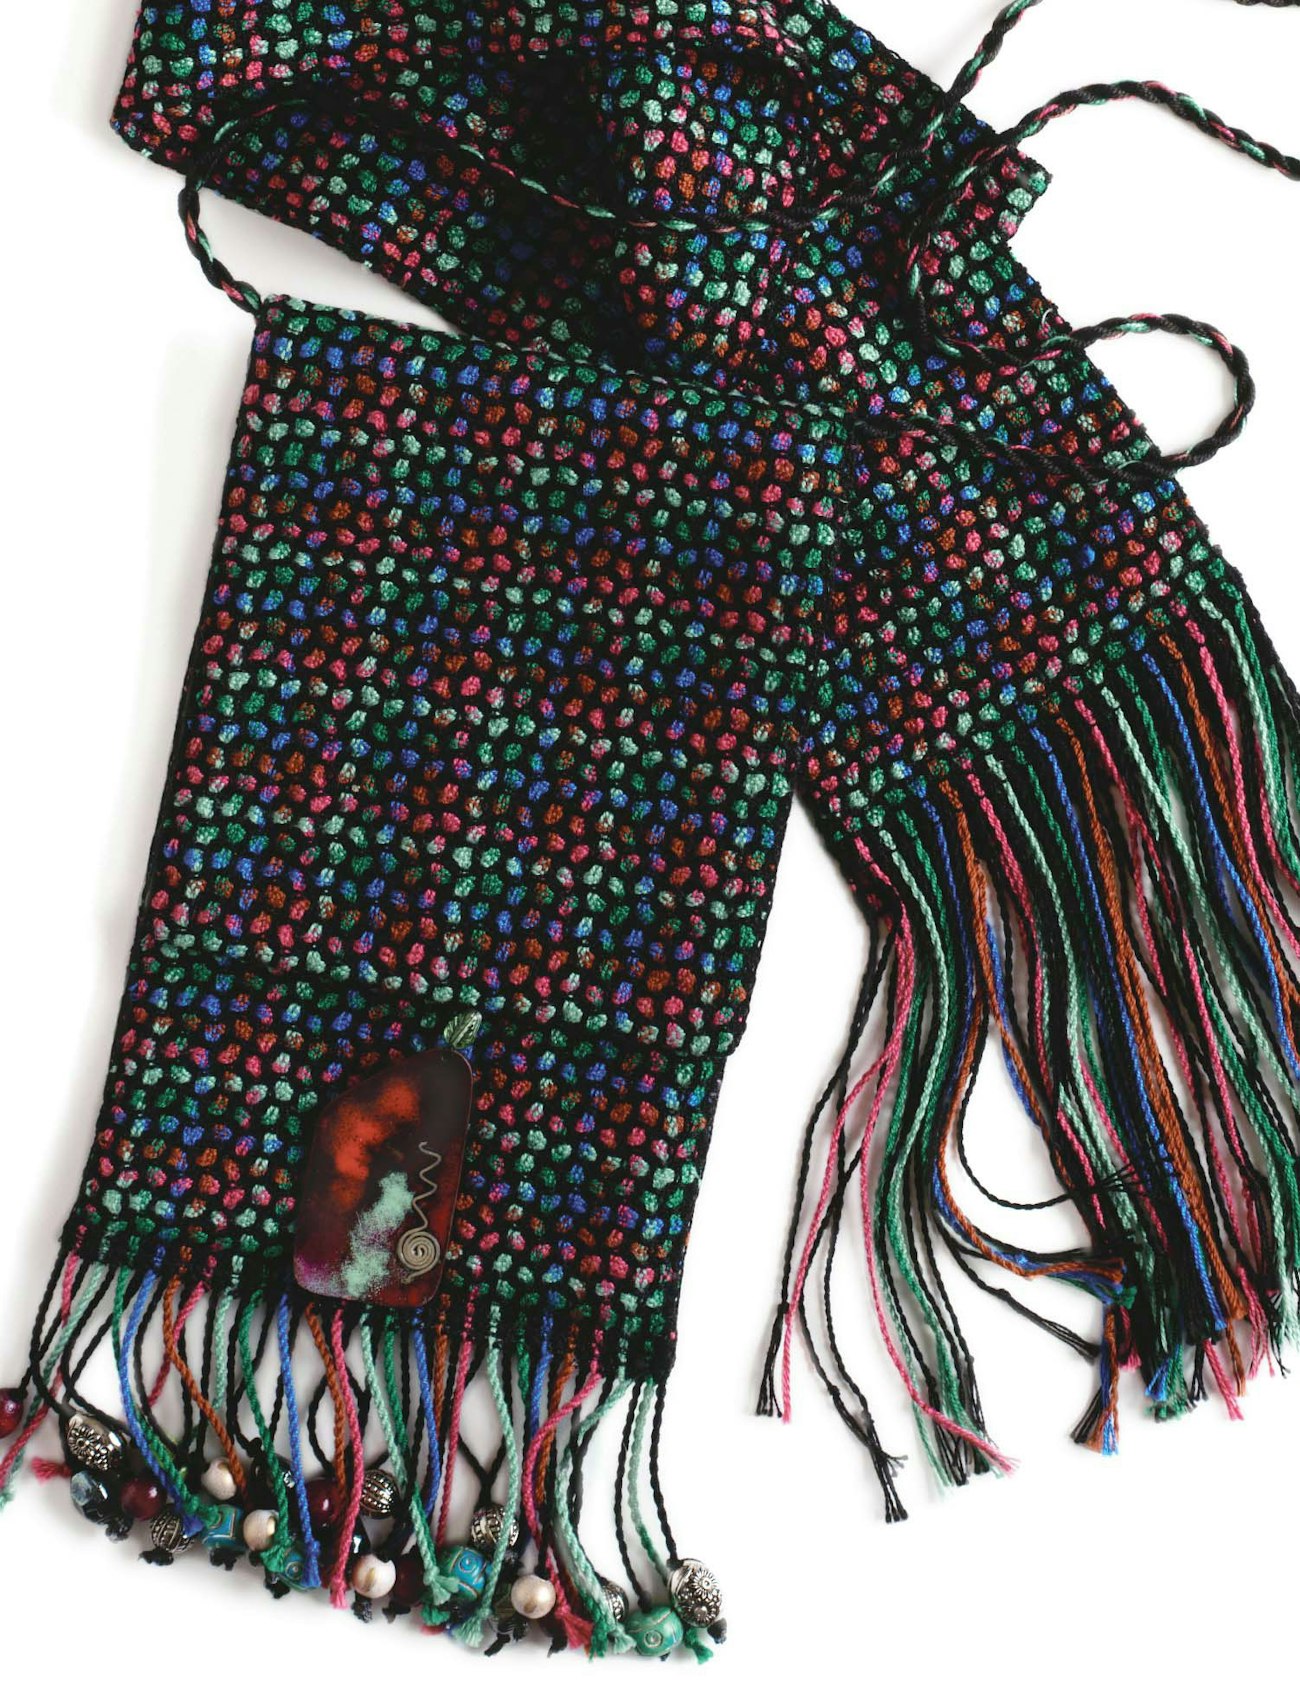 Patricia Springer's scarf and bag of the month design